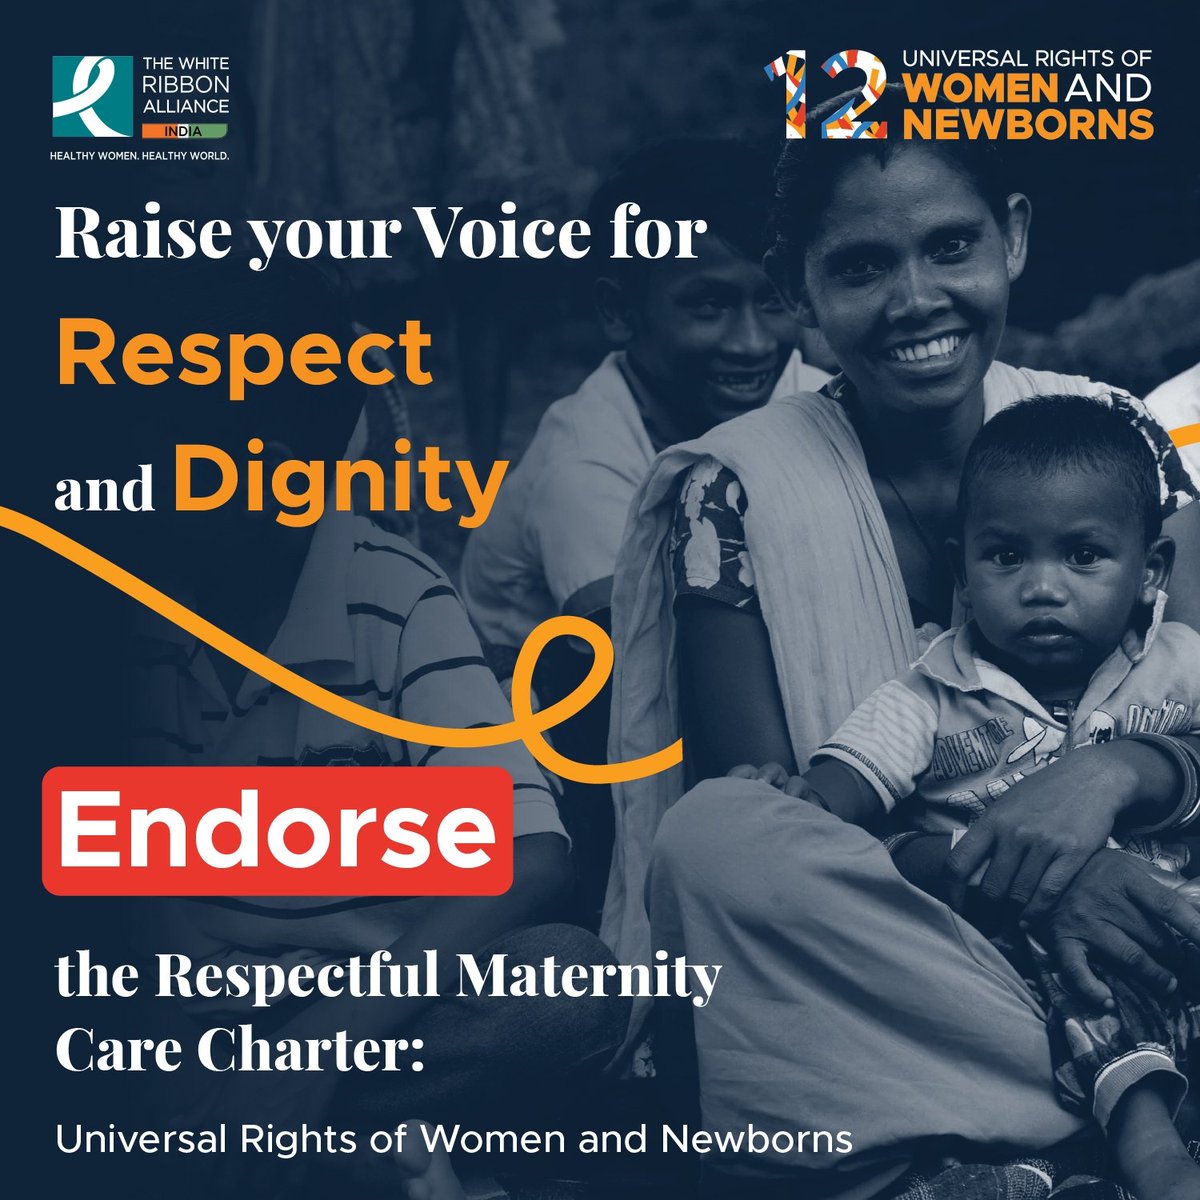 #RespectfulCare must become the norm for women’s experience during pregnancy and childbirth.

Endorse the Respectful Maternity Care Charter: Universal Rights of Women and Newborns at c3india.org/wrai-rmc-chart…

Your support will make a significant change.

#RMC4All #BaaraHaqHamaara